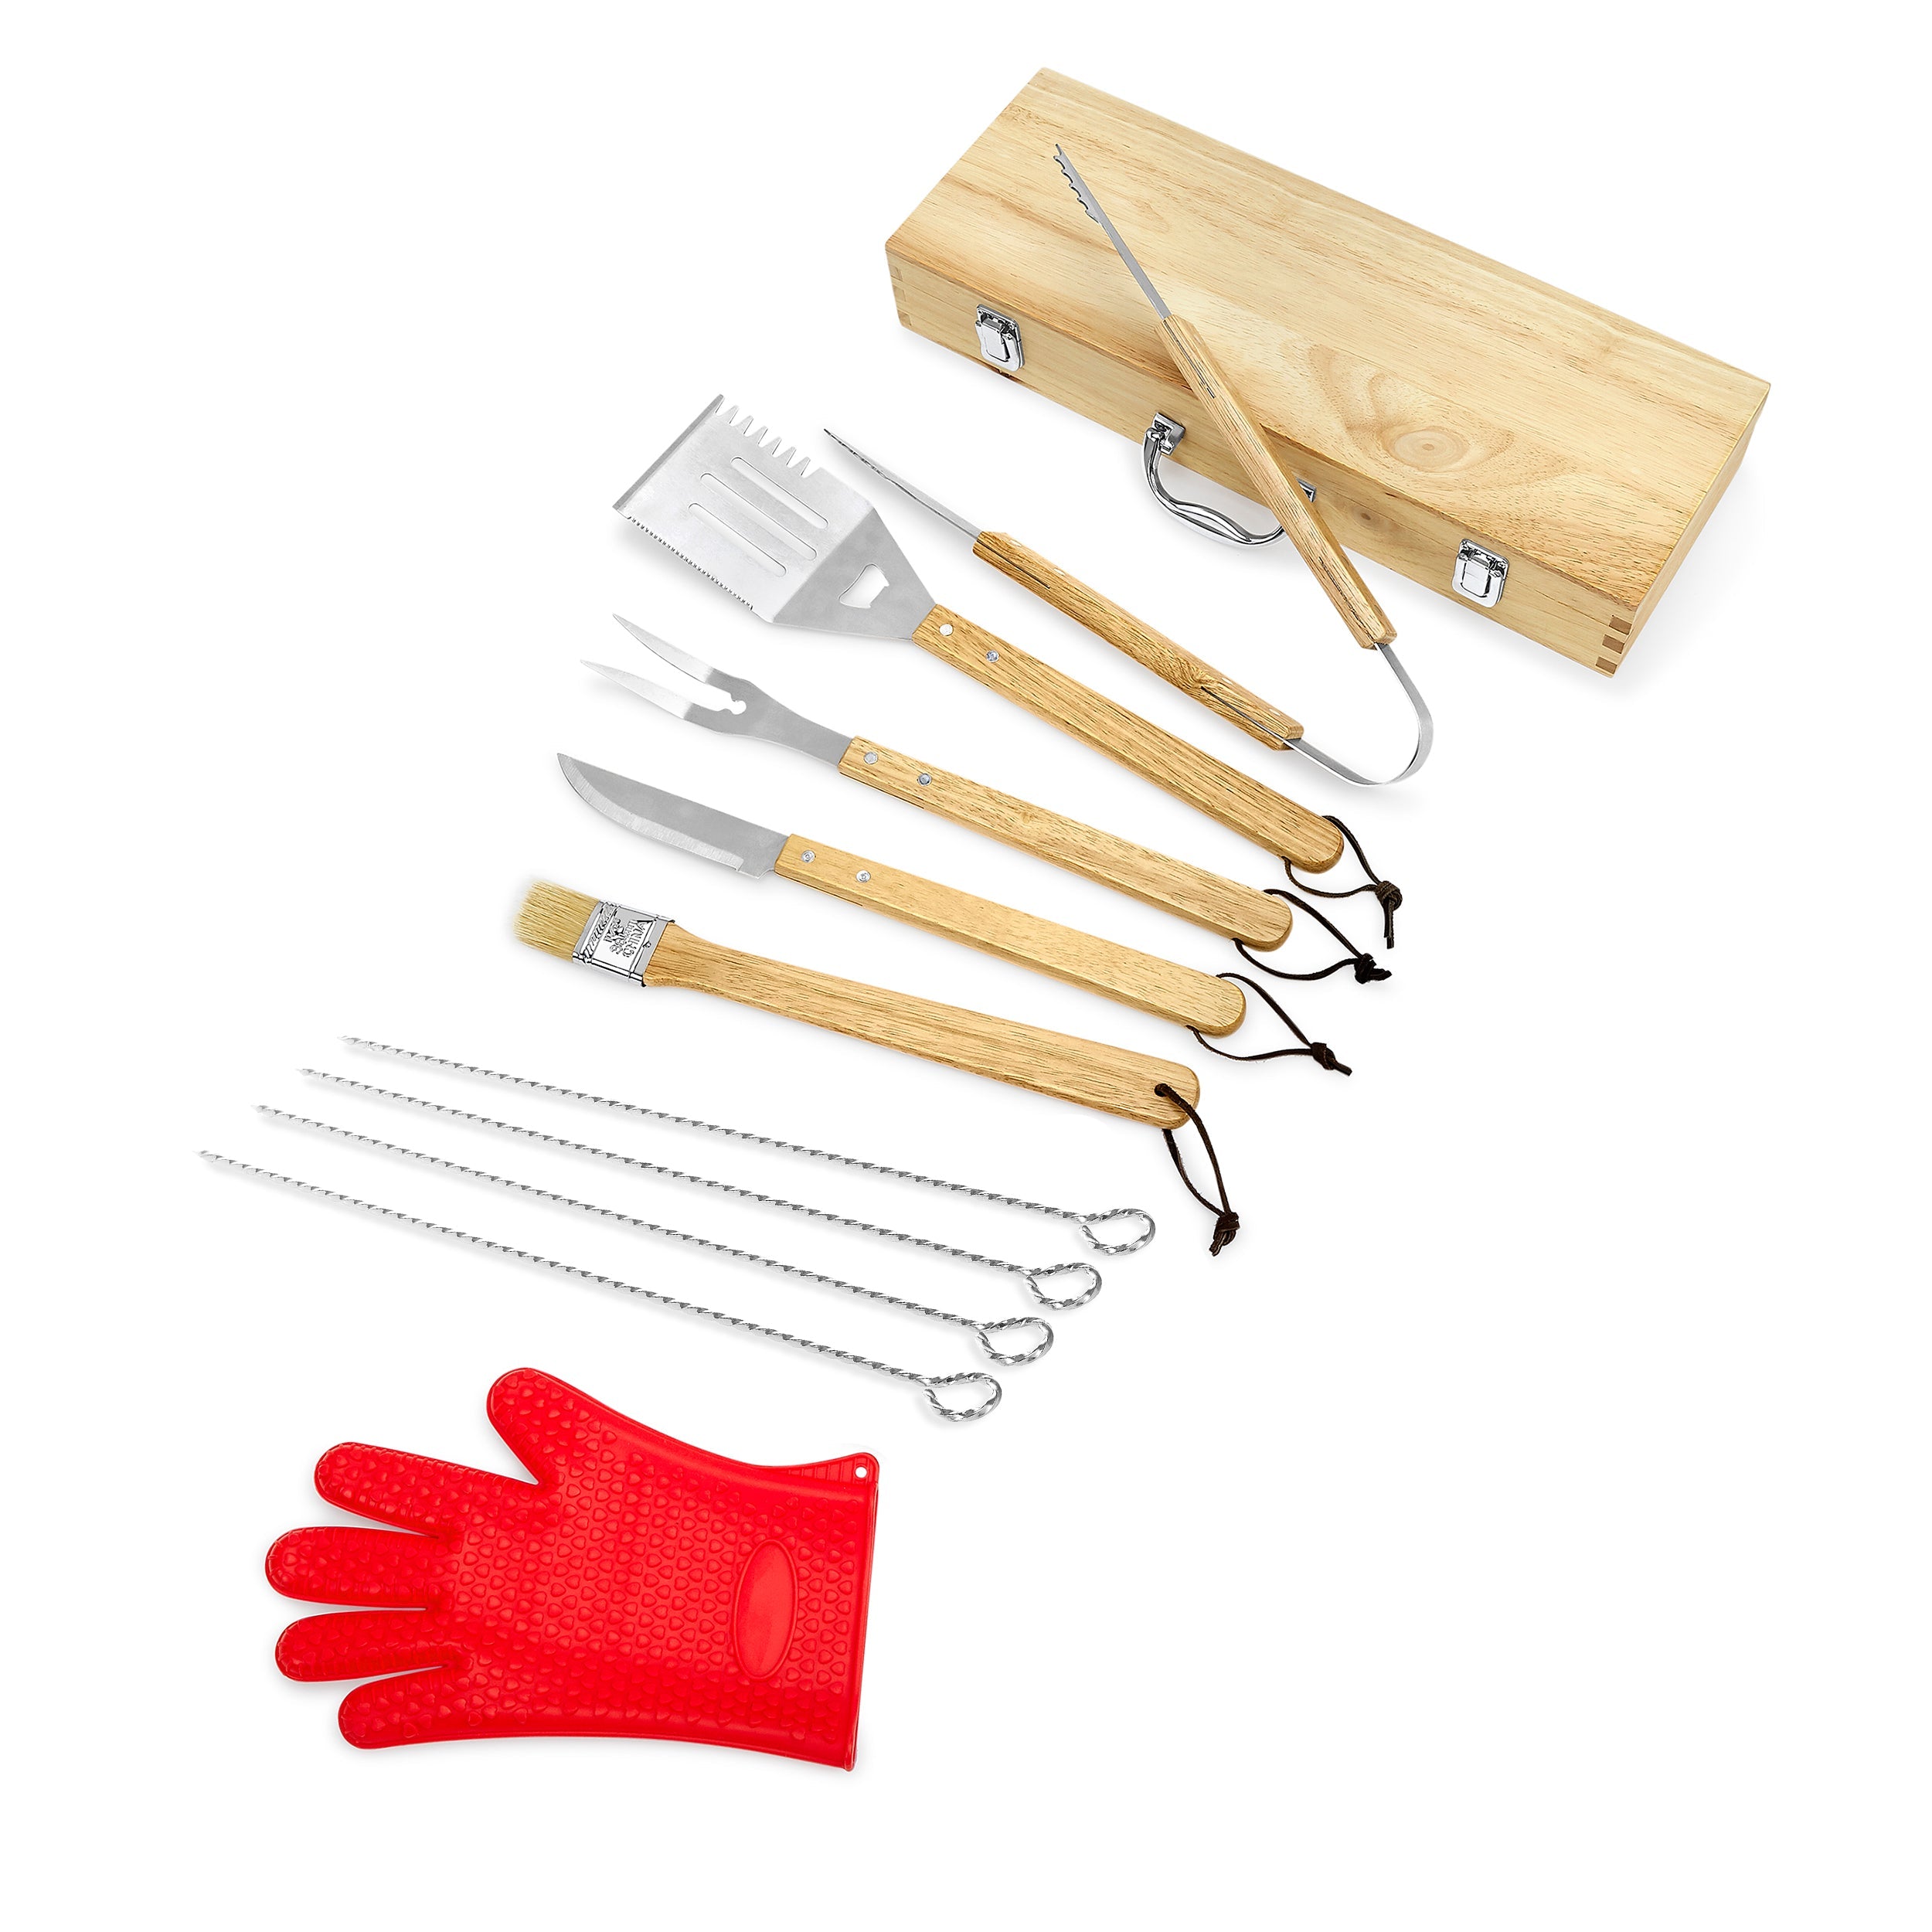 11 Piece BBQ Grill Set - The Grill Master